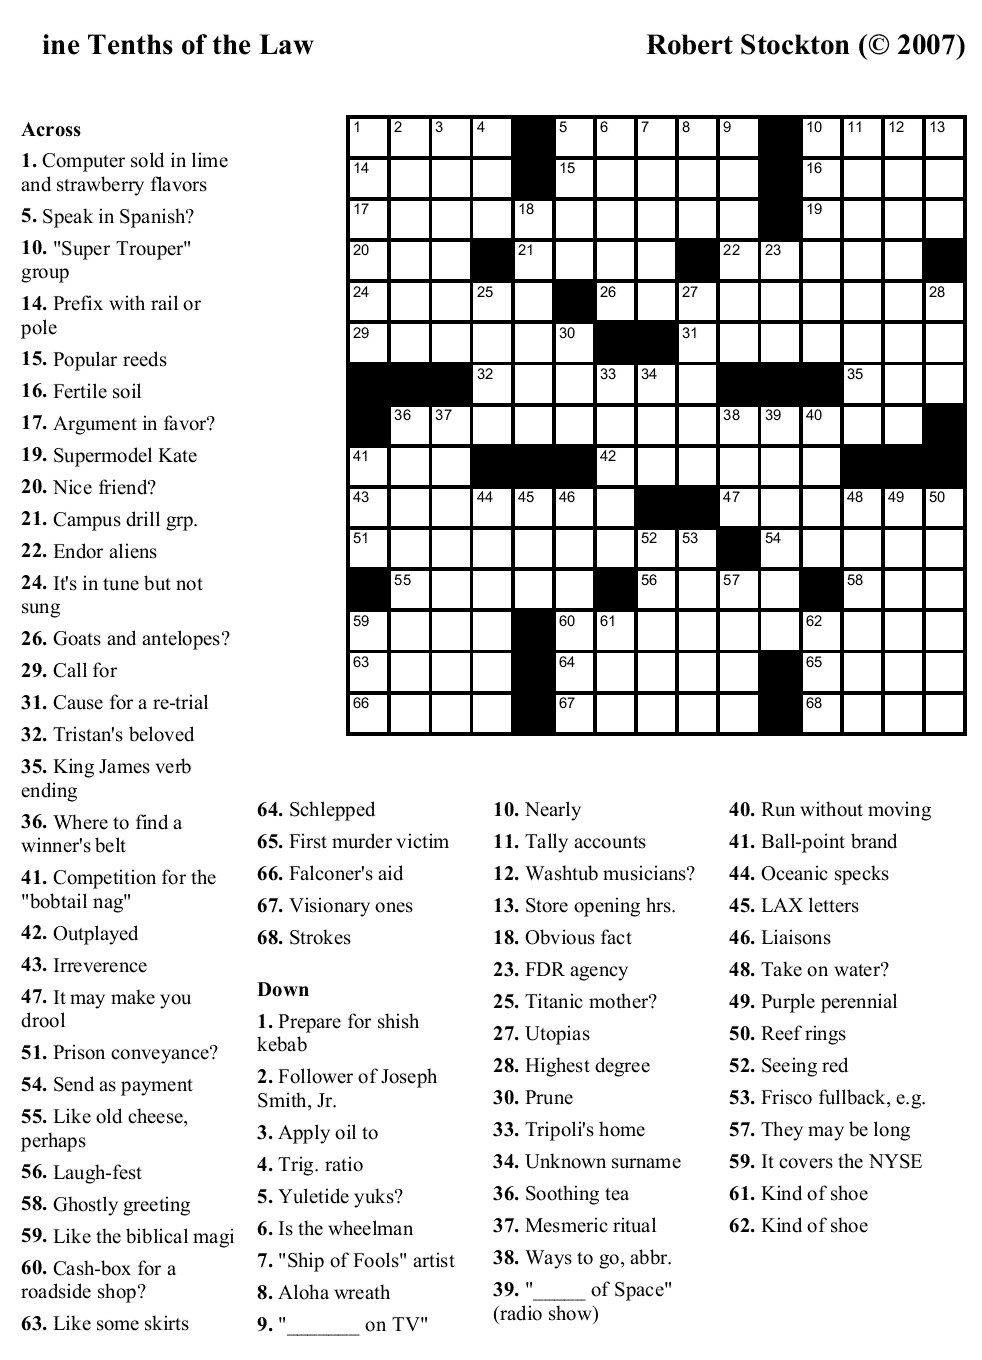 Crossword Puzzles Printable - Yahoo Image Search Results | Crossword - Printable Crossword Themed